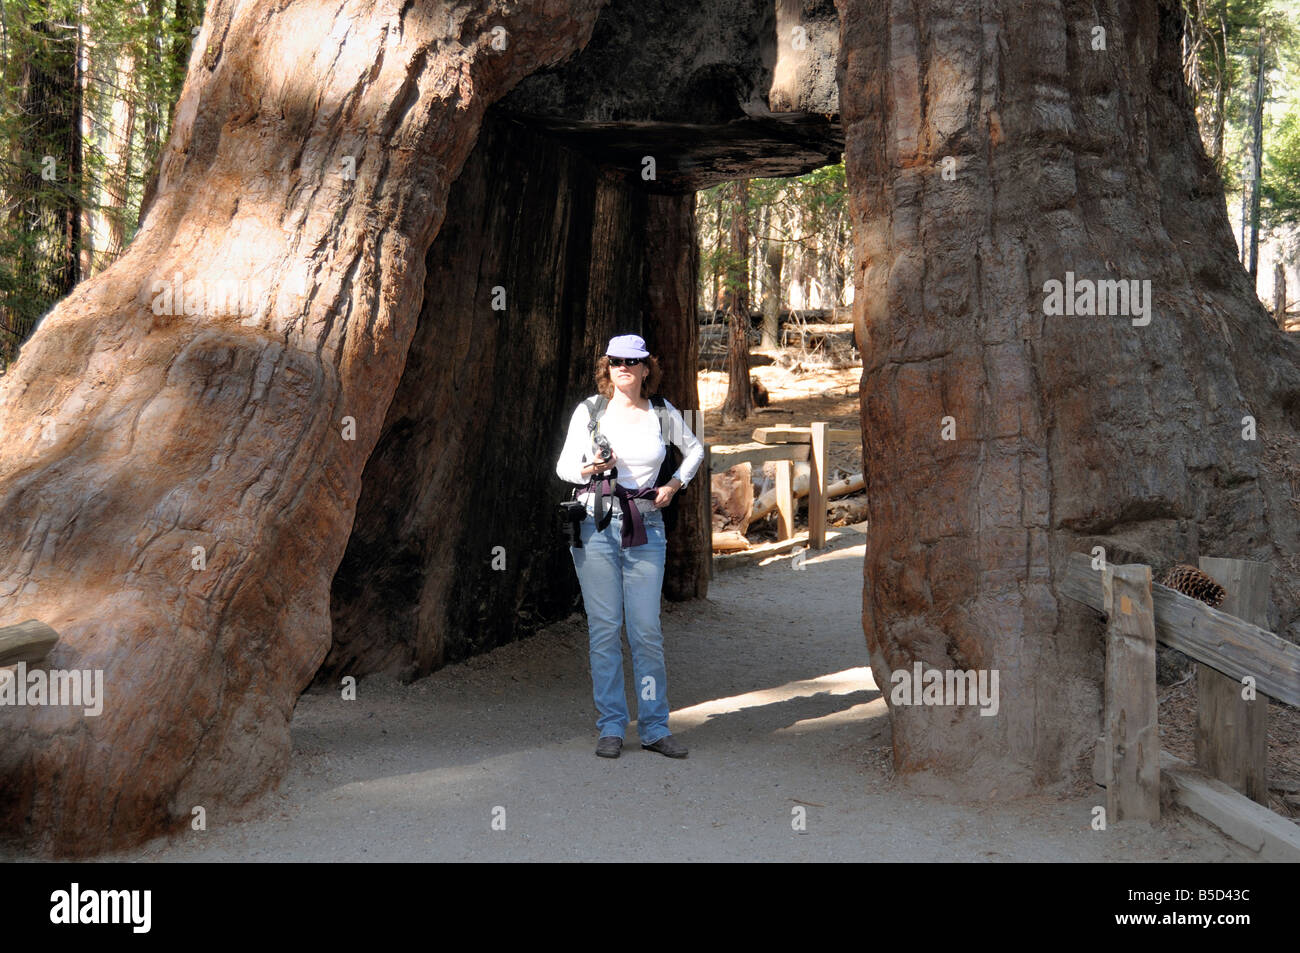 'California Tunnel Tree' a Giant Sequoia in Yosemite National Park famous for the tunnel cut through the trunk Stock Photo